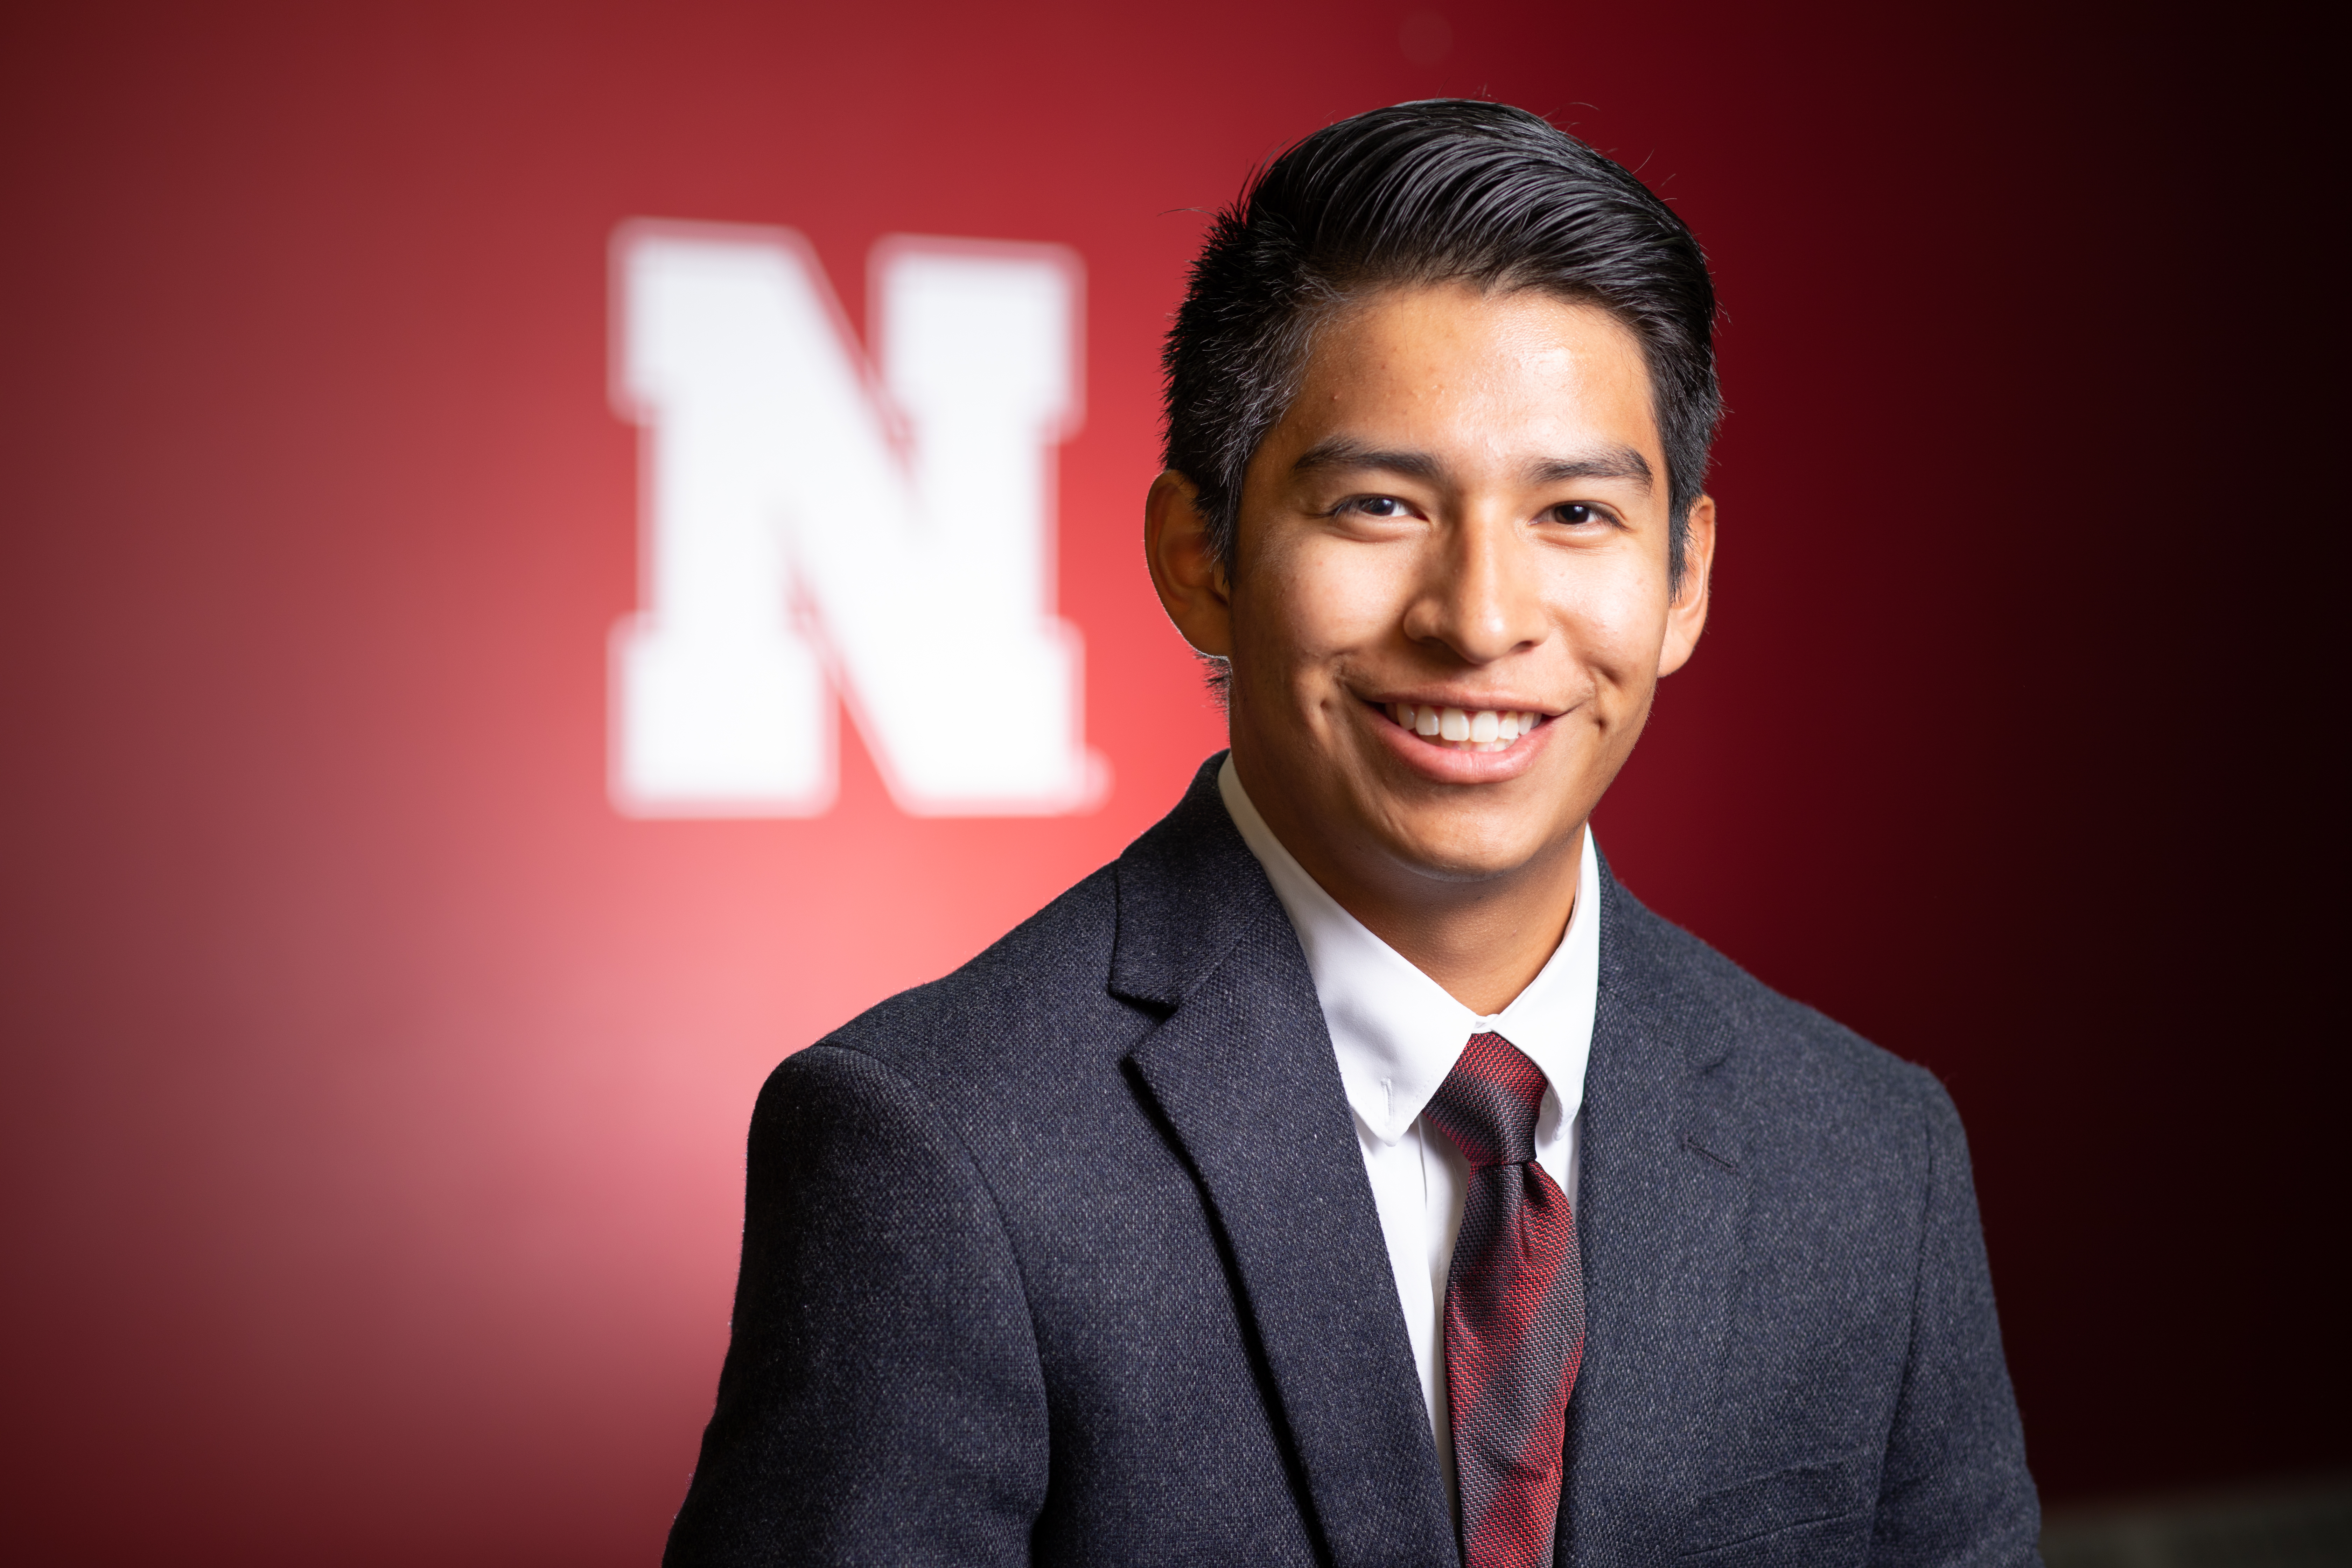 Freshman Paul Deeter from Pine, Colorado is a Member of the 2019 Cohort in PGA Golf Management at UNL